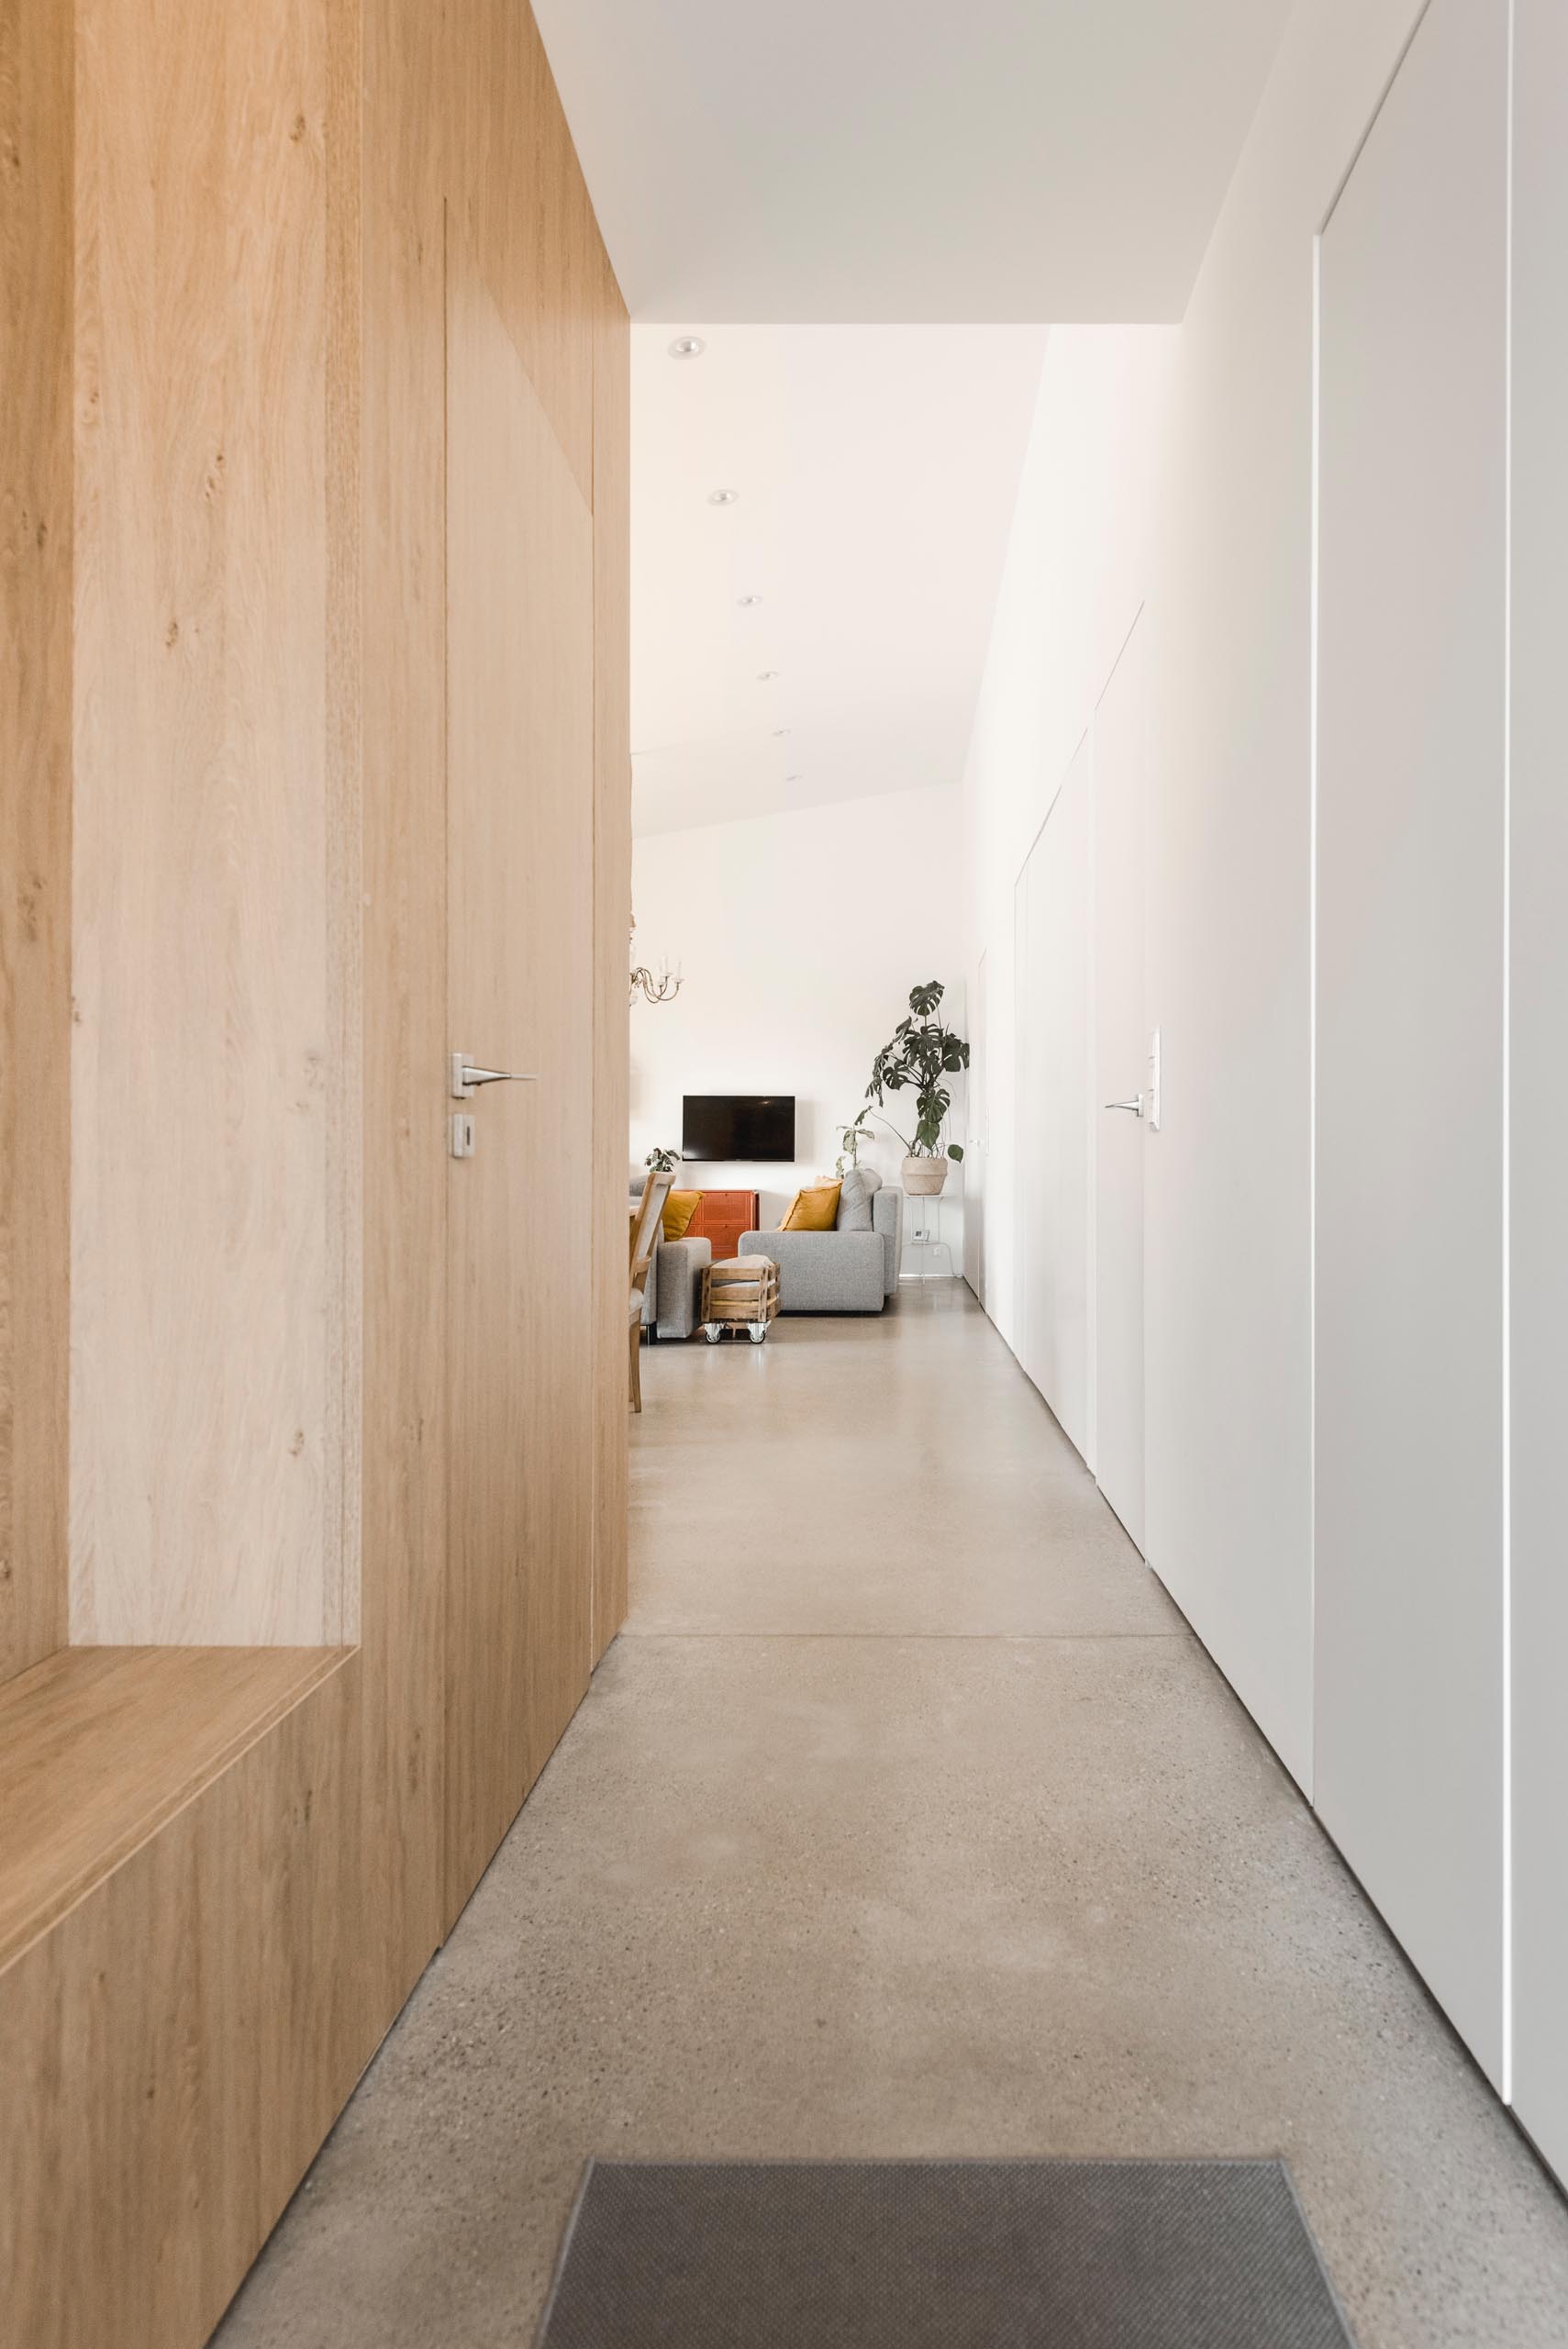 A modern hallway with concrete floors and flush doorways.